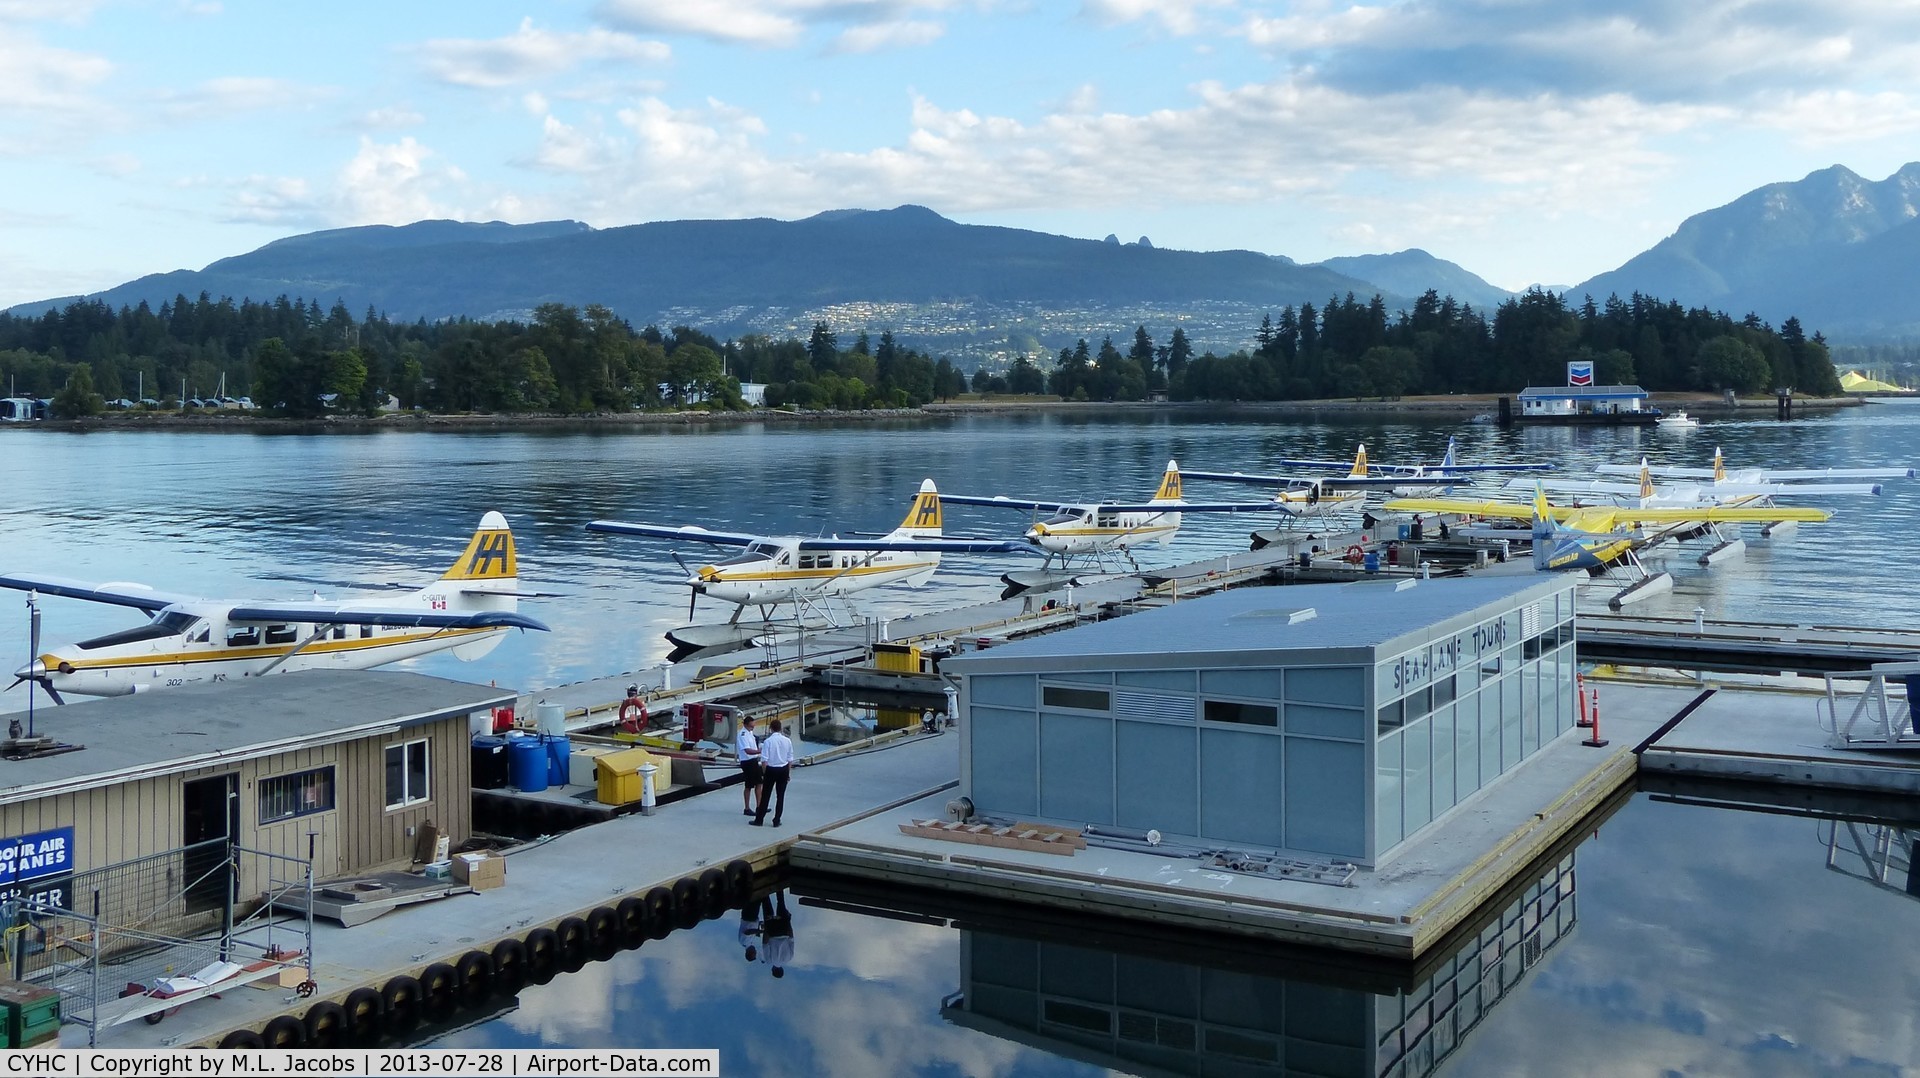 Vancouver Harbour Water Airport (Vancouver Coal Harbour Seaplane Base), Vancouver, British Columbia Canada (CYHC) - Early overcast Sunday morning at Harbour Air terminal in Coal Harbour.  Stanley Park and the North Shore mountains are in the background.